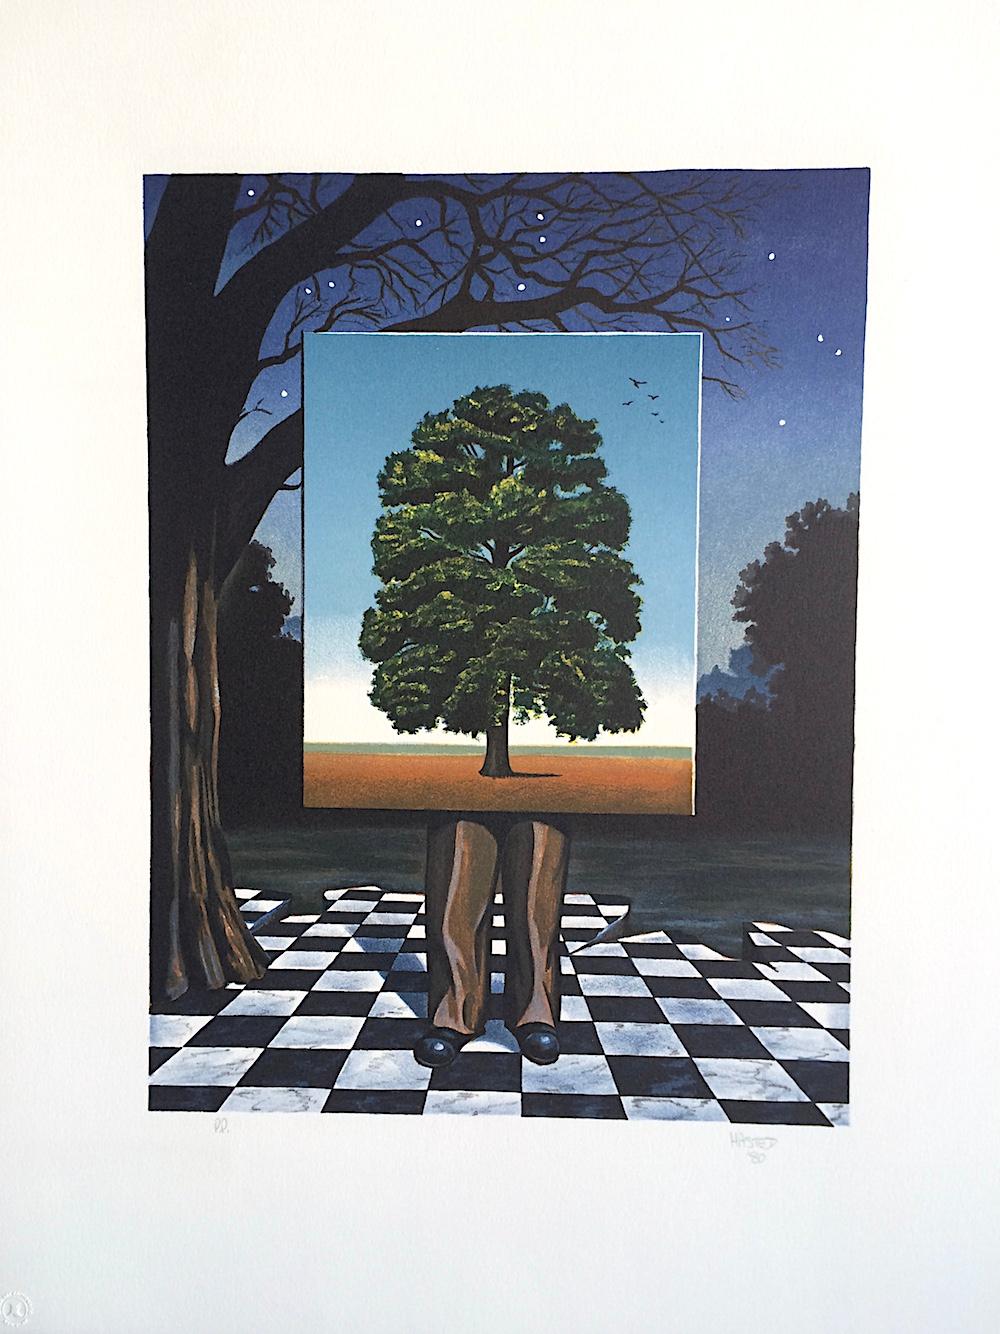  PUBLIC OUTCRY Signed Lithograph, Surrealist Scene Man, Tree, Checkered Tiles For Sale 1